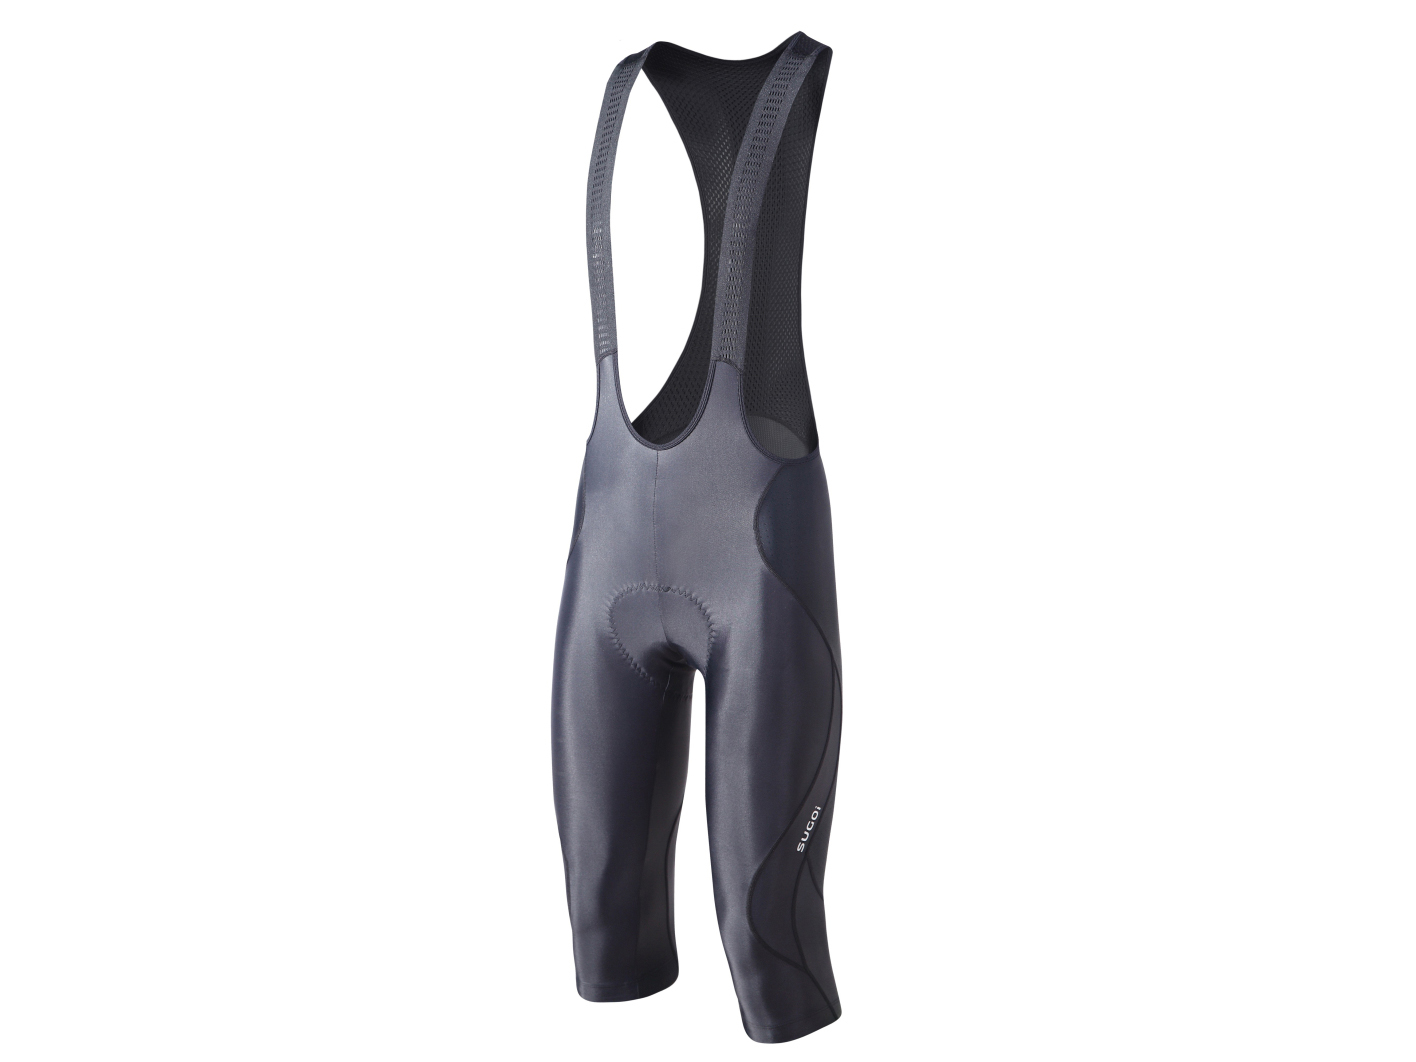 Men’s knitted bicycle Bib short with pad